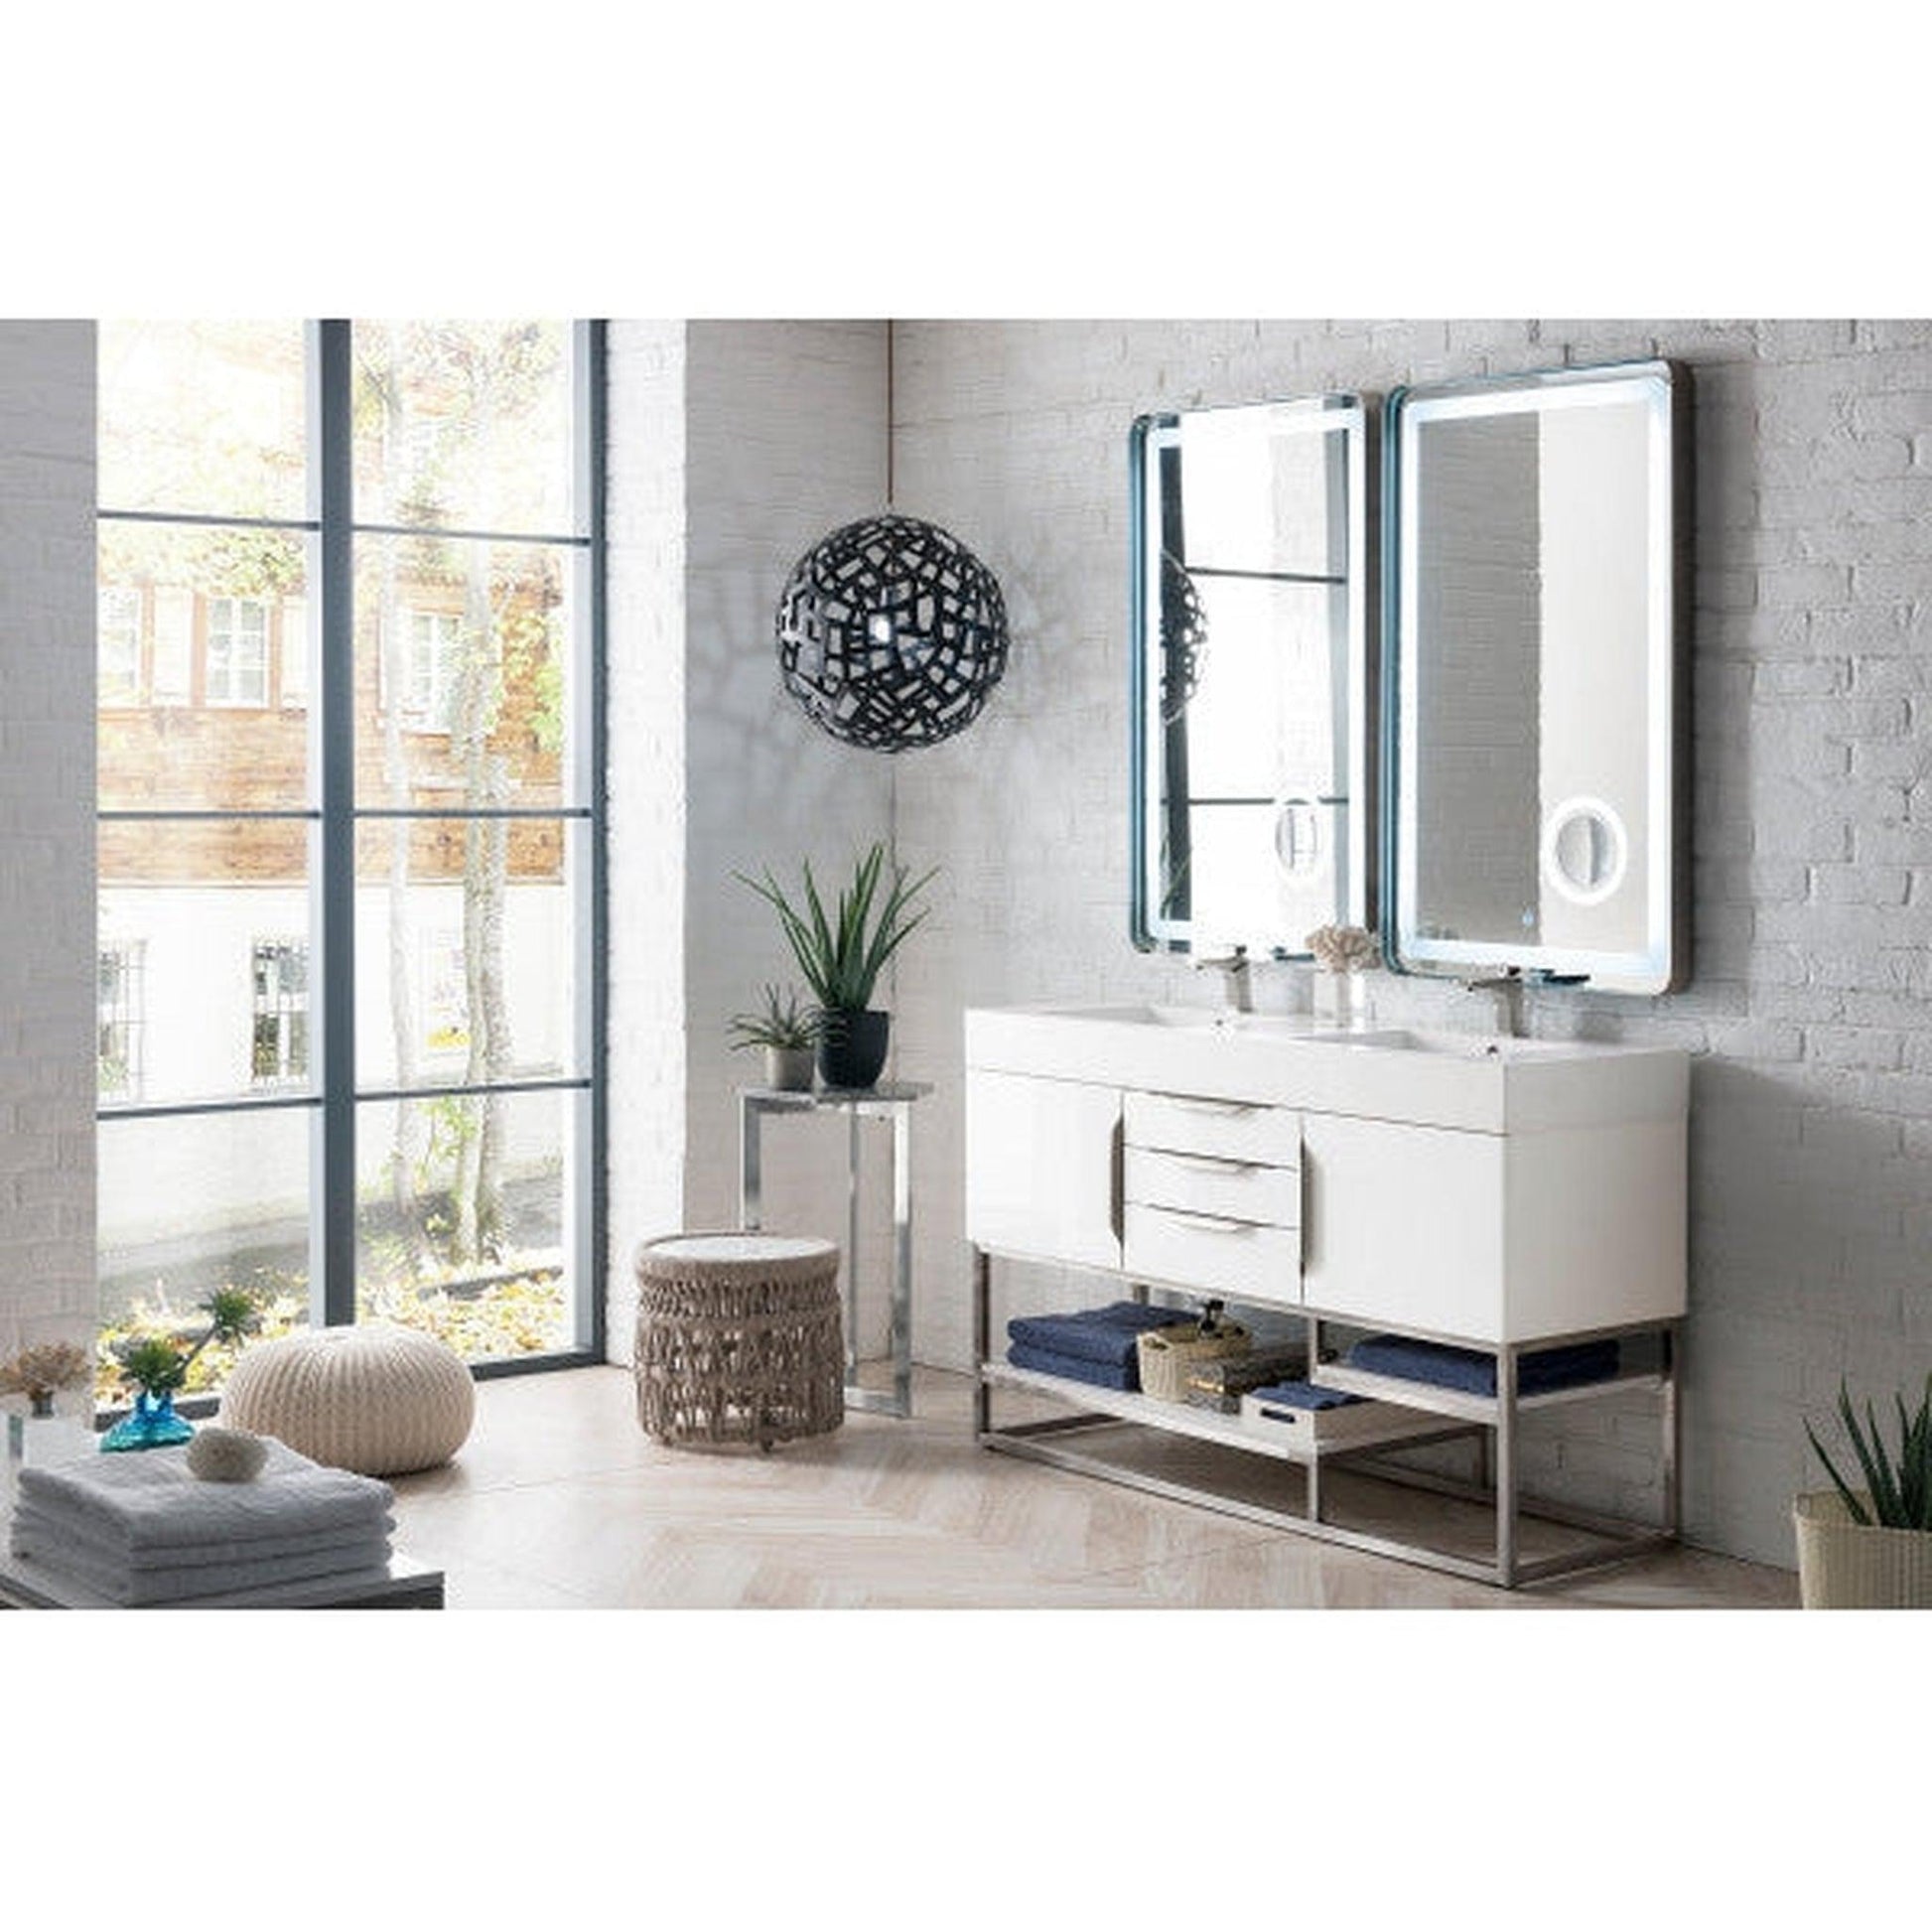 James Martin Columbia 59" Double Glossy White Bathroom Vanity With 6" Glossy White Composite Countertop